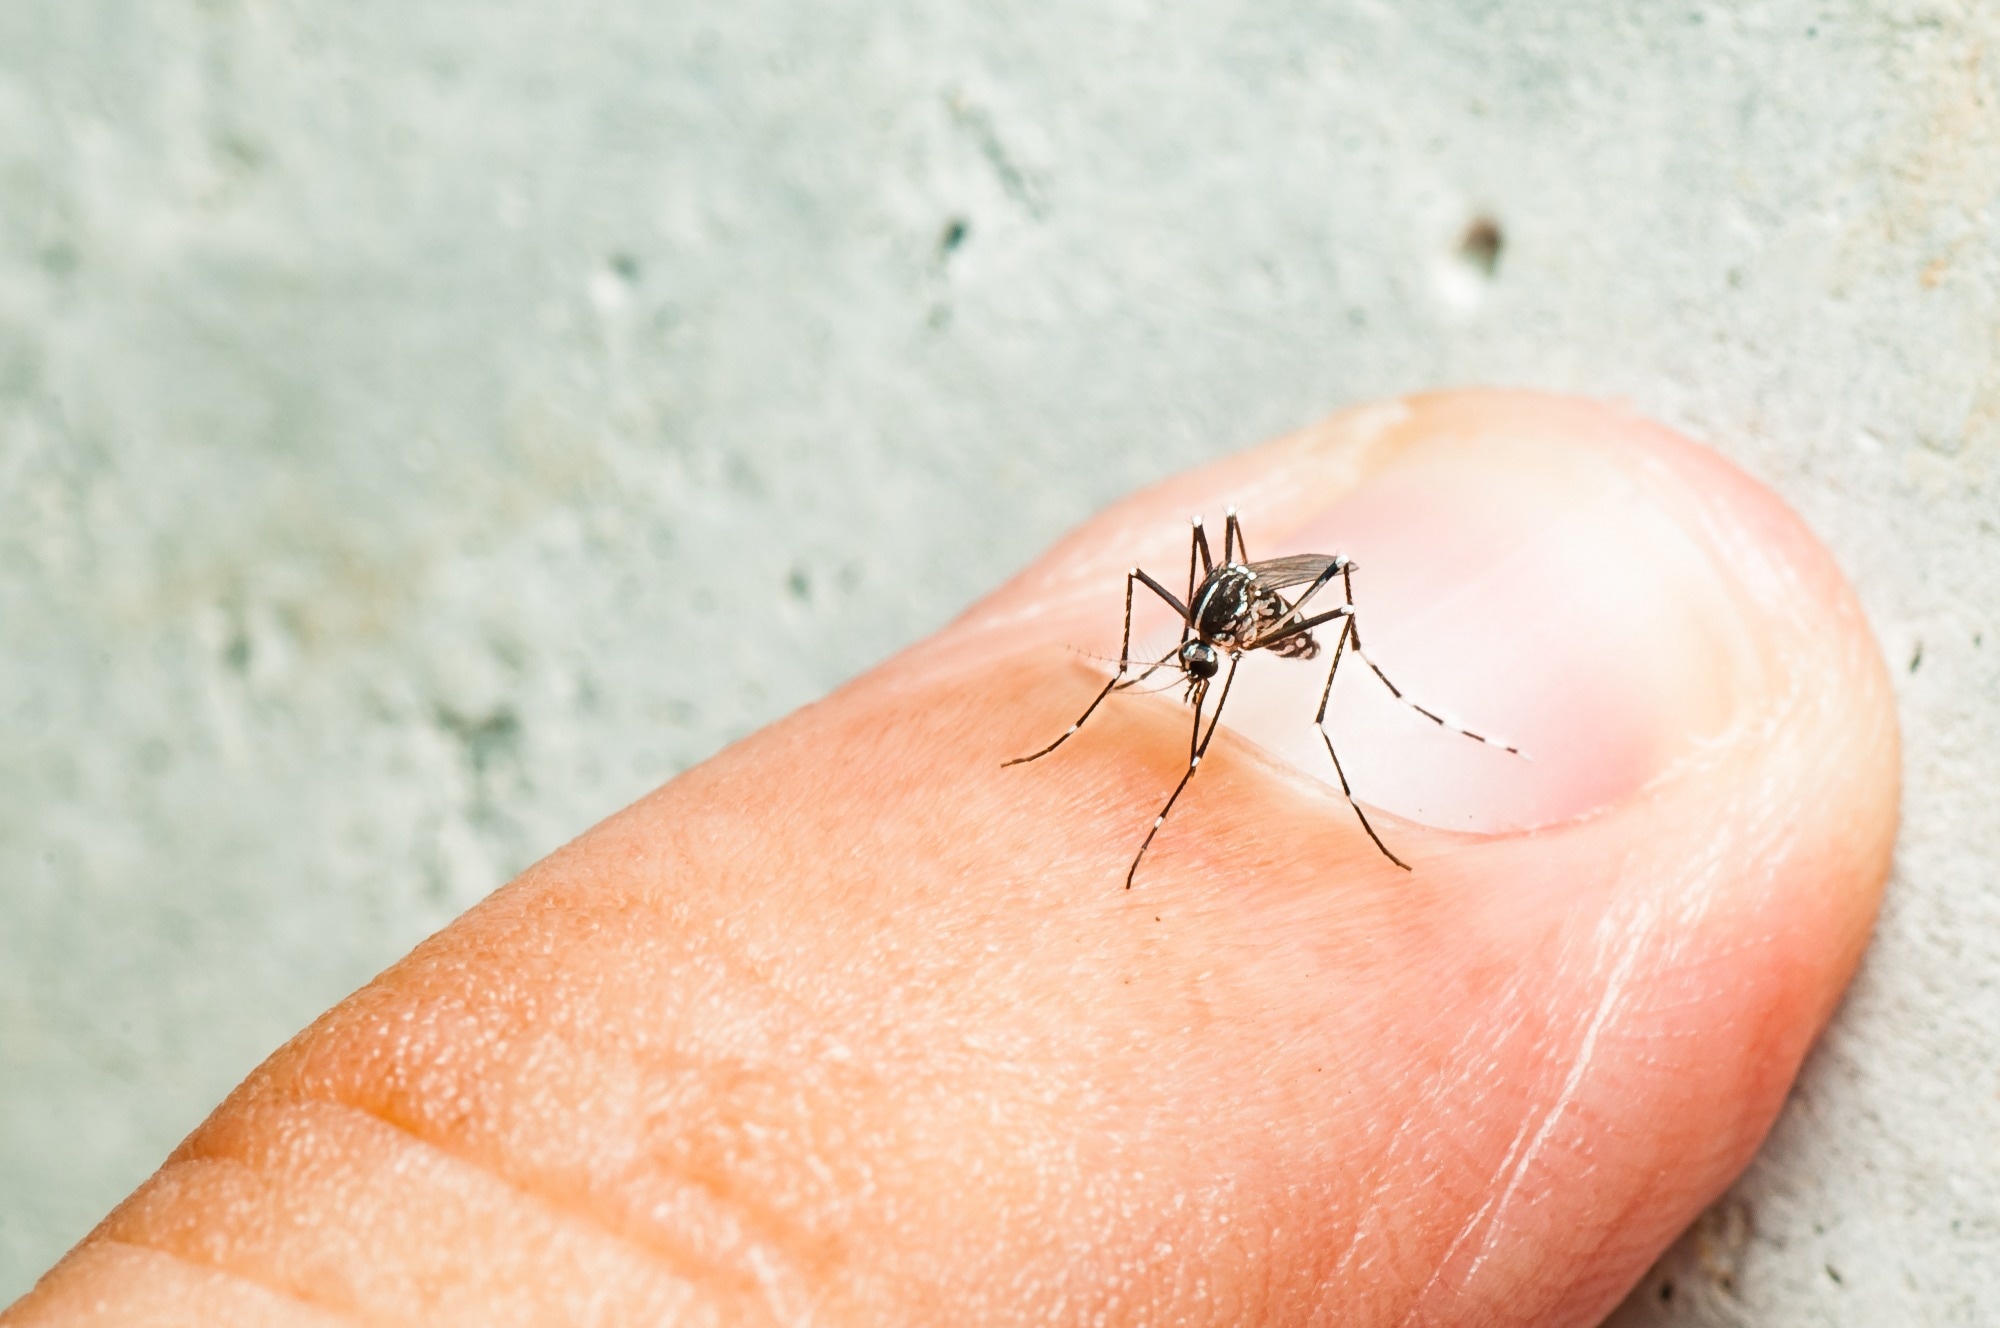 Study: Differential mosquito attraction to humans is associated with skin-derived carboxylic acid levels. Image Credit: Fendizz / Shutterstock